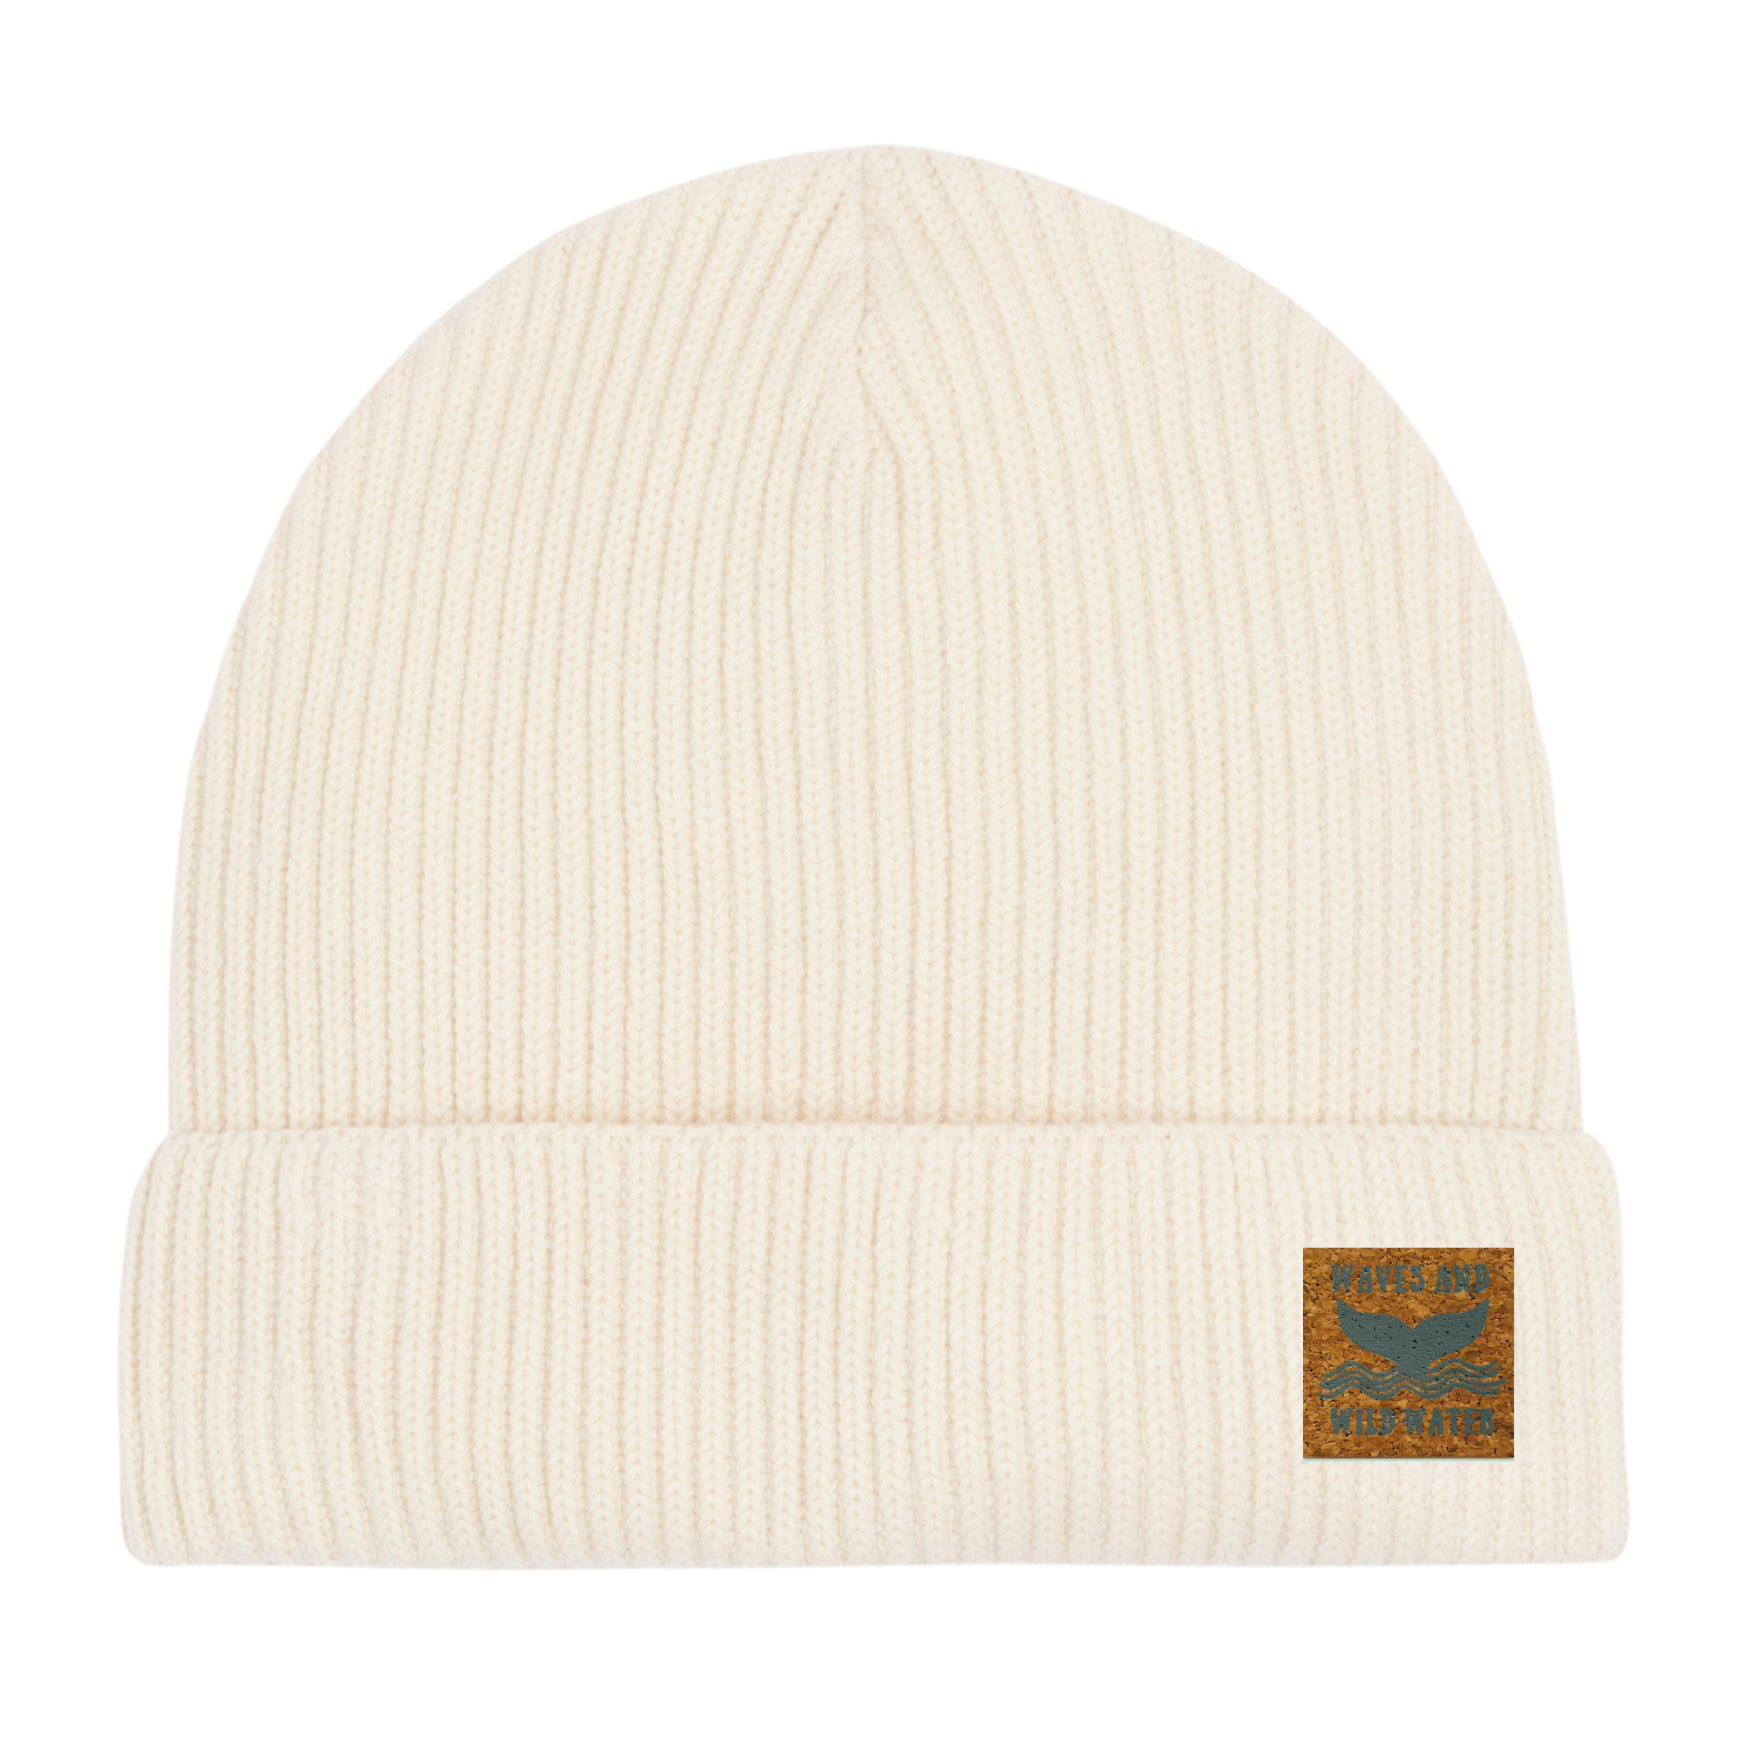 An off white fisherman beanie hat with a Waves & Wild Water label. 